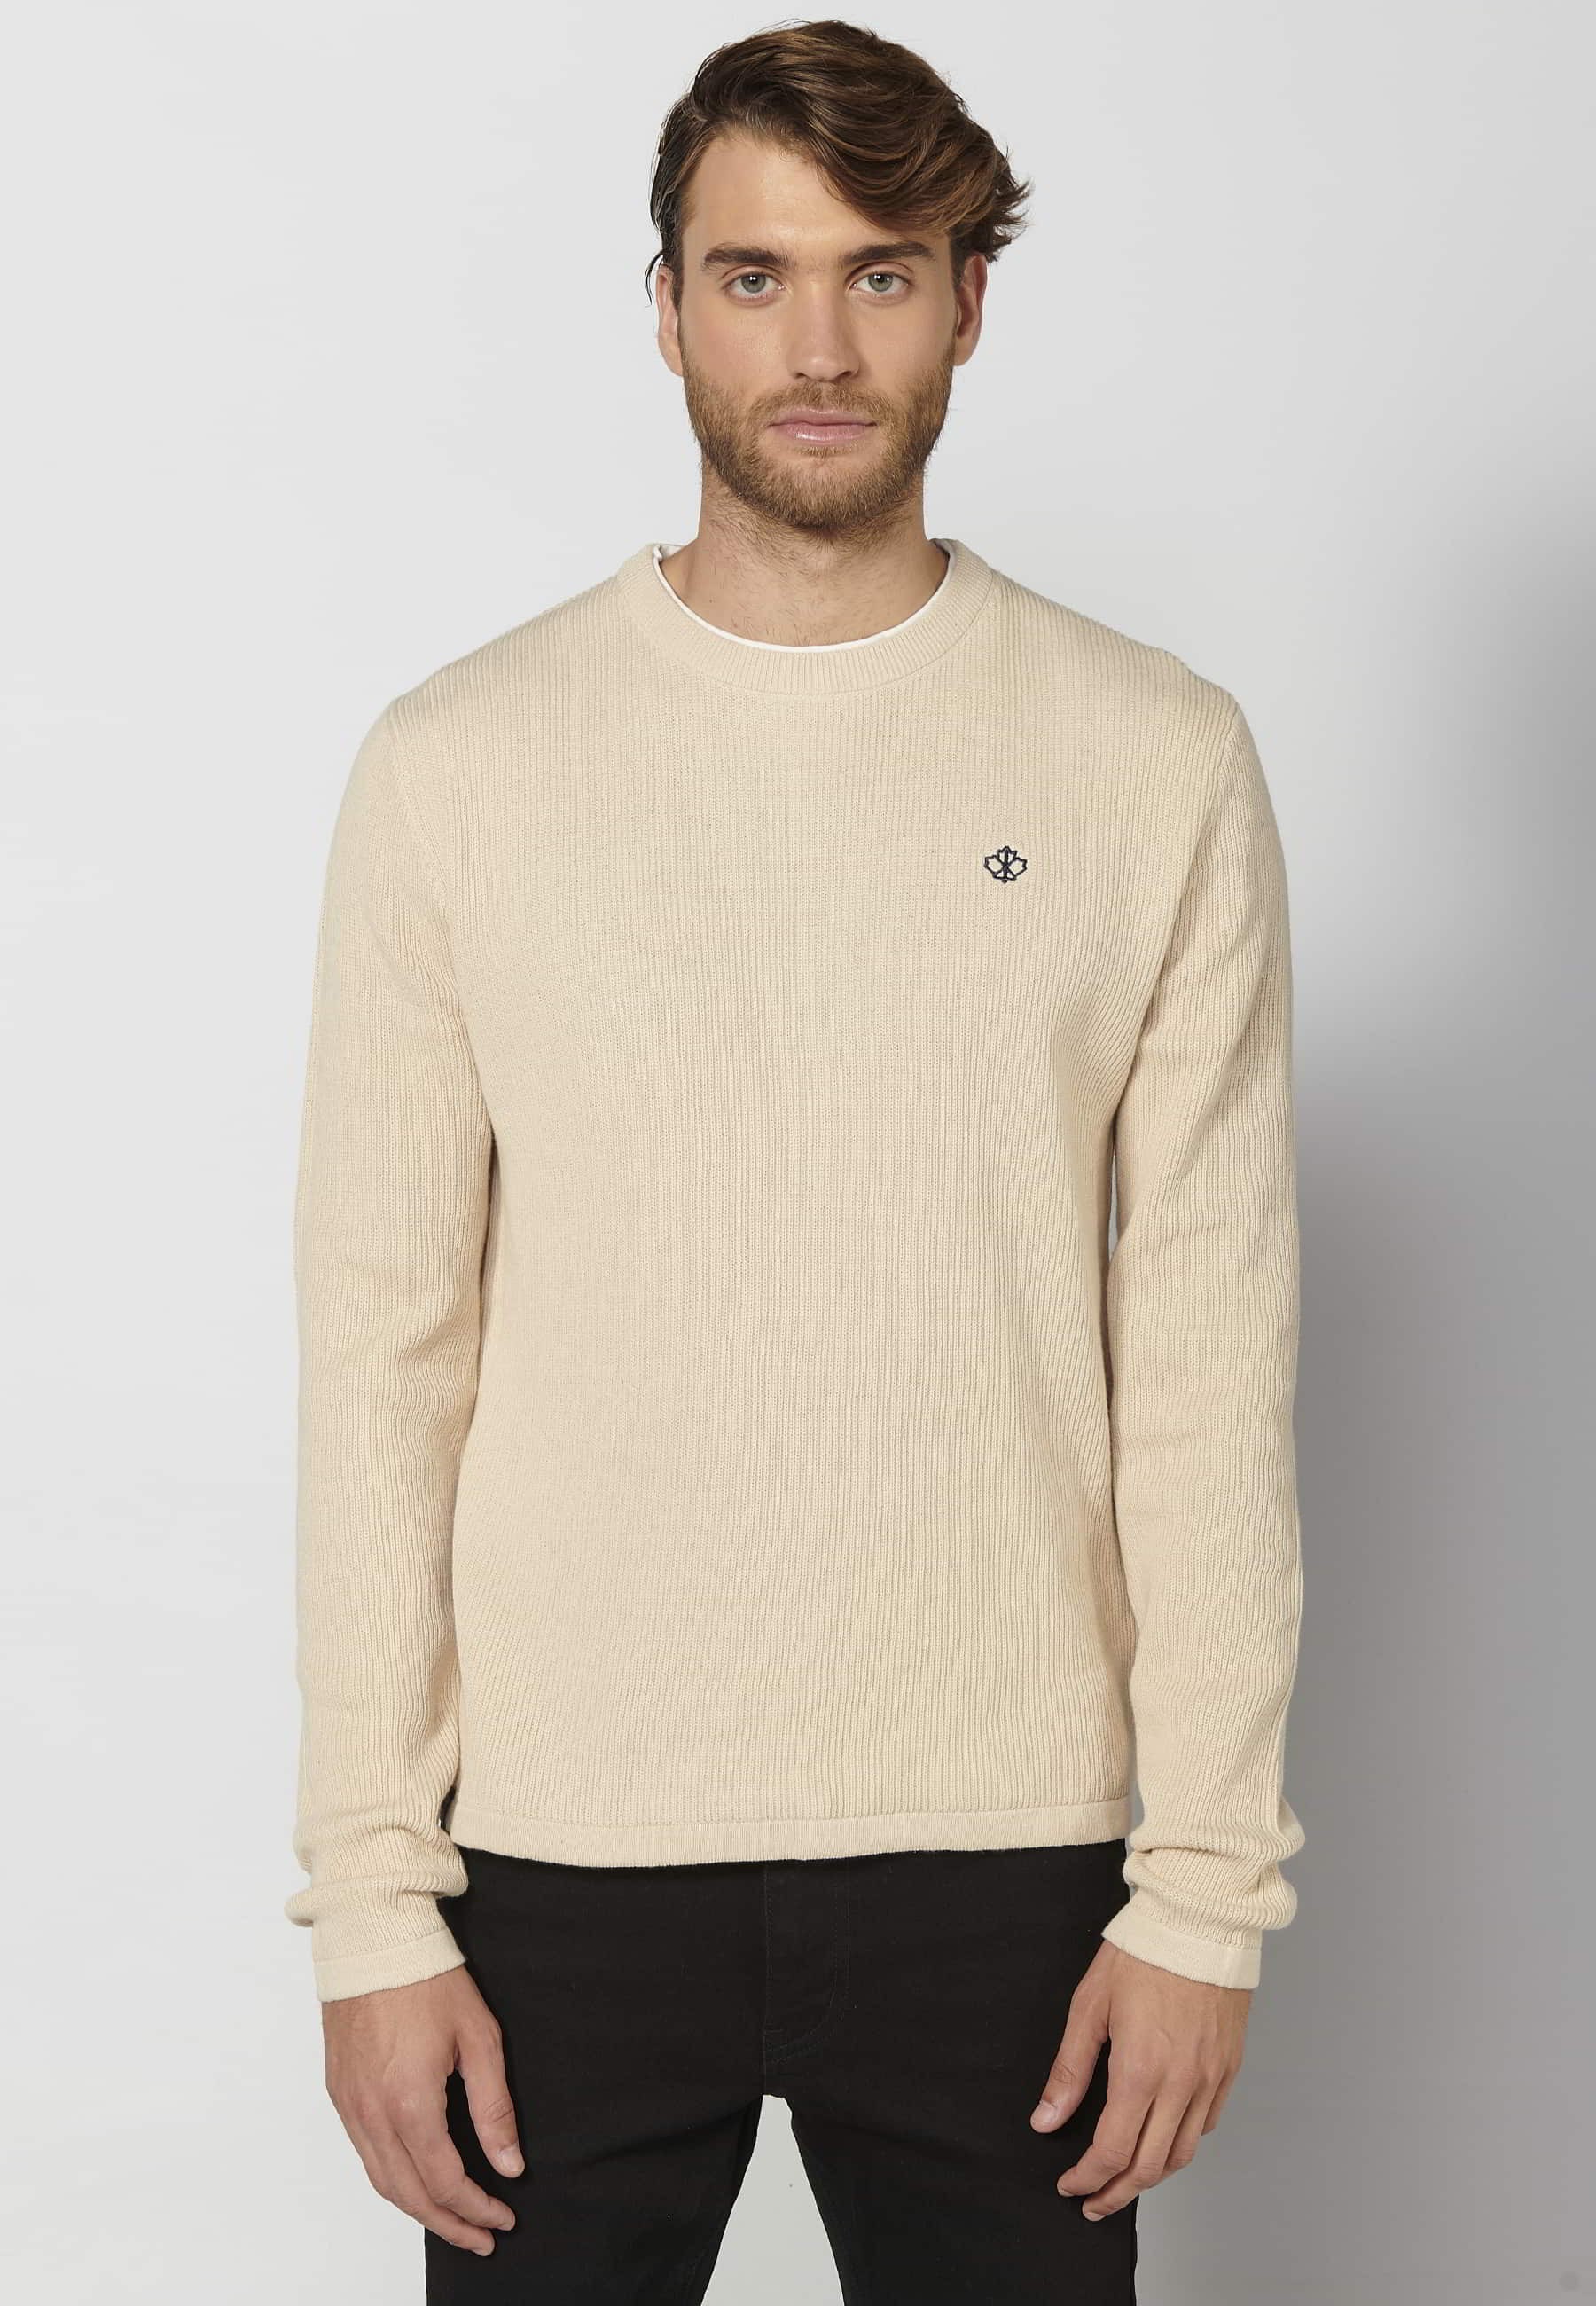 Long-sleeved cotton tricot sweater with embroidered detail in Cream color for Men 6